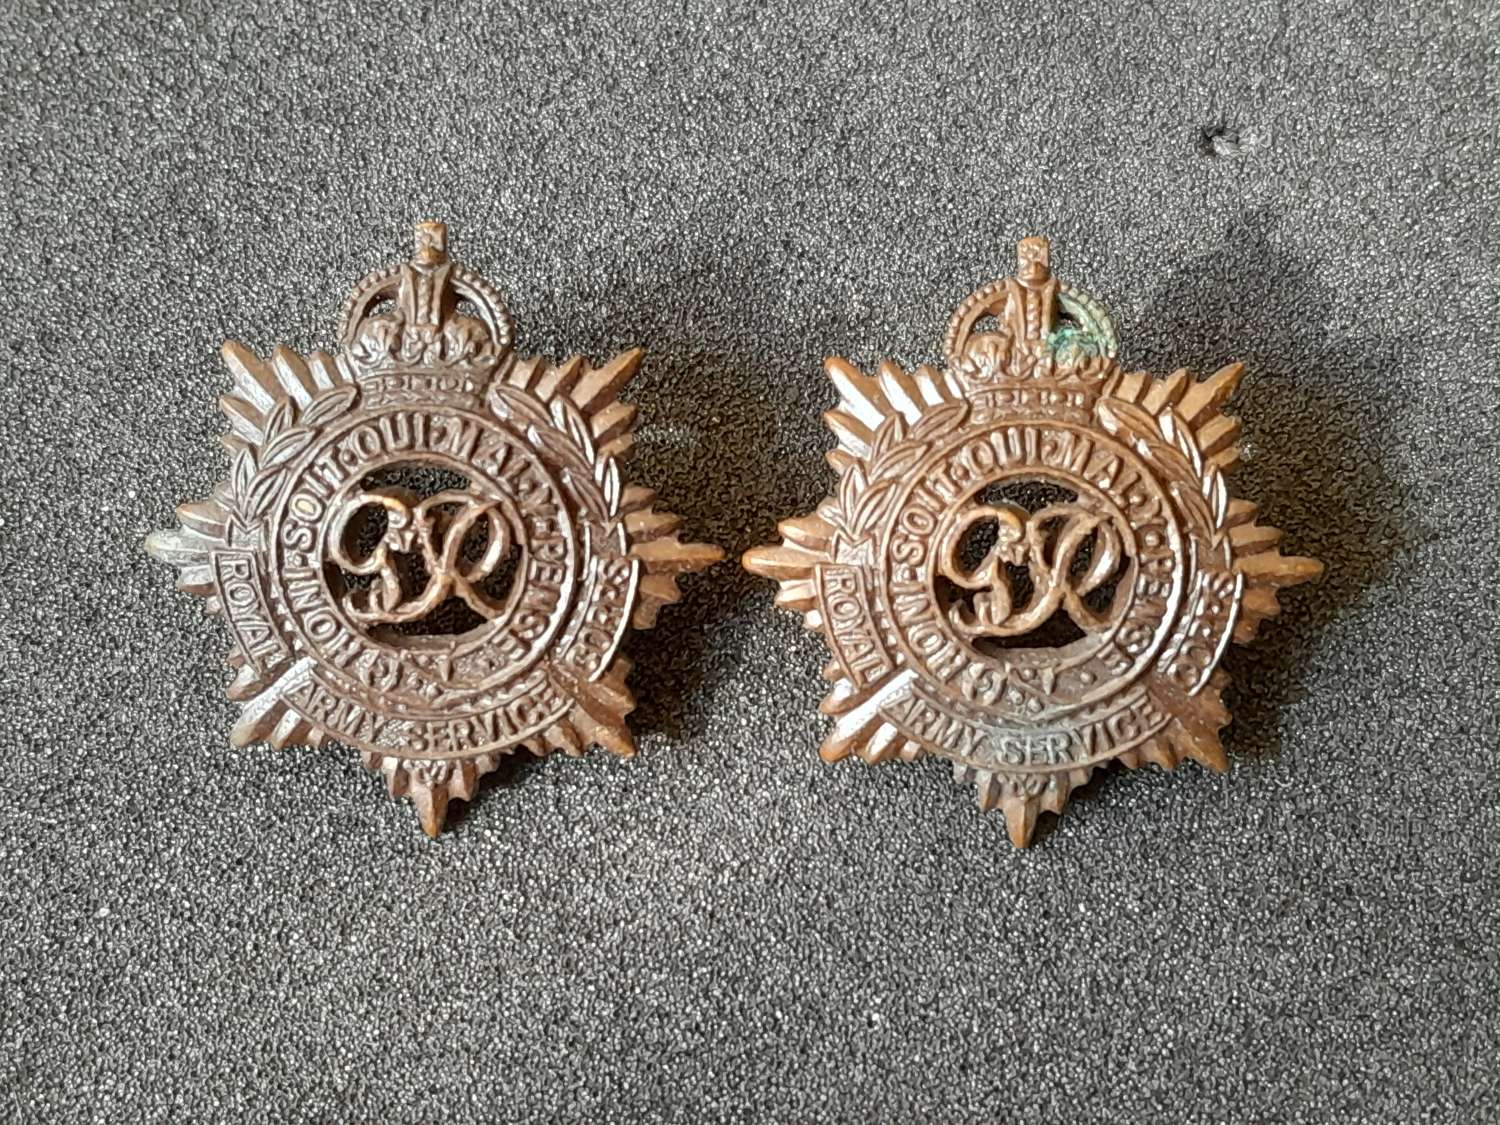 Pair of Army Service Corps Lapel Badges